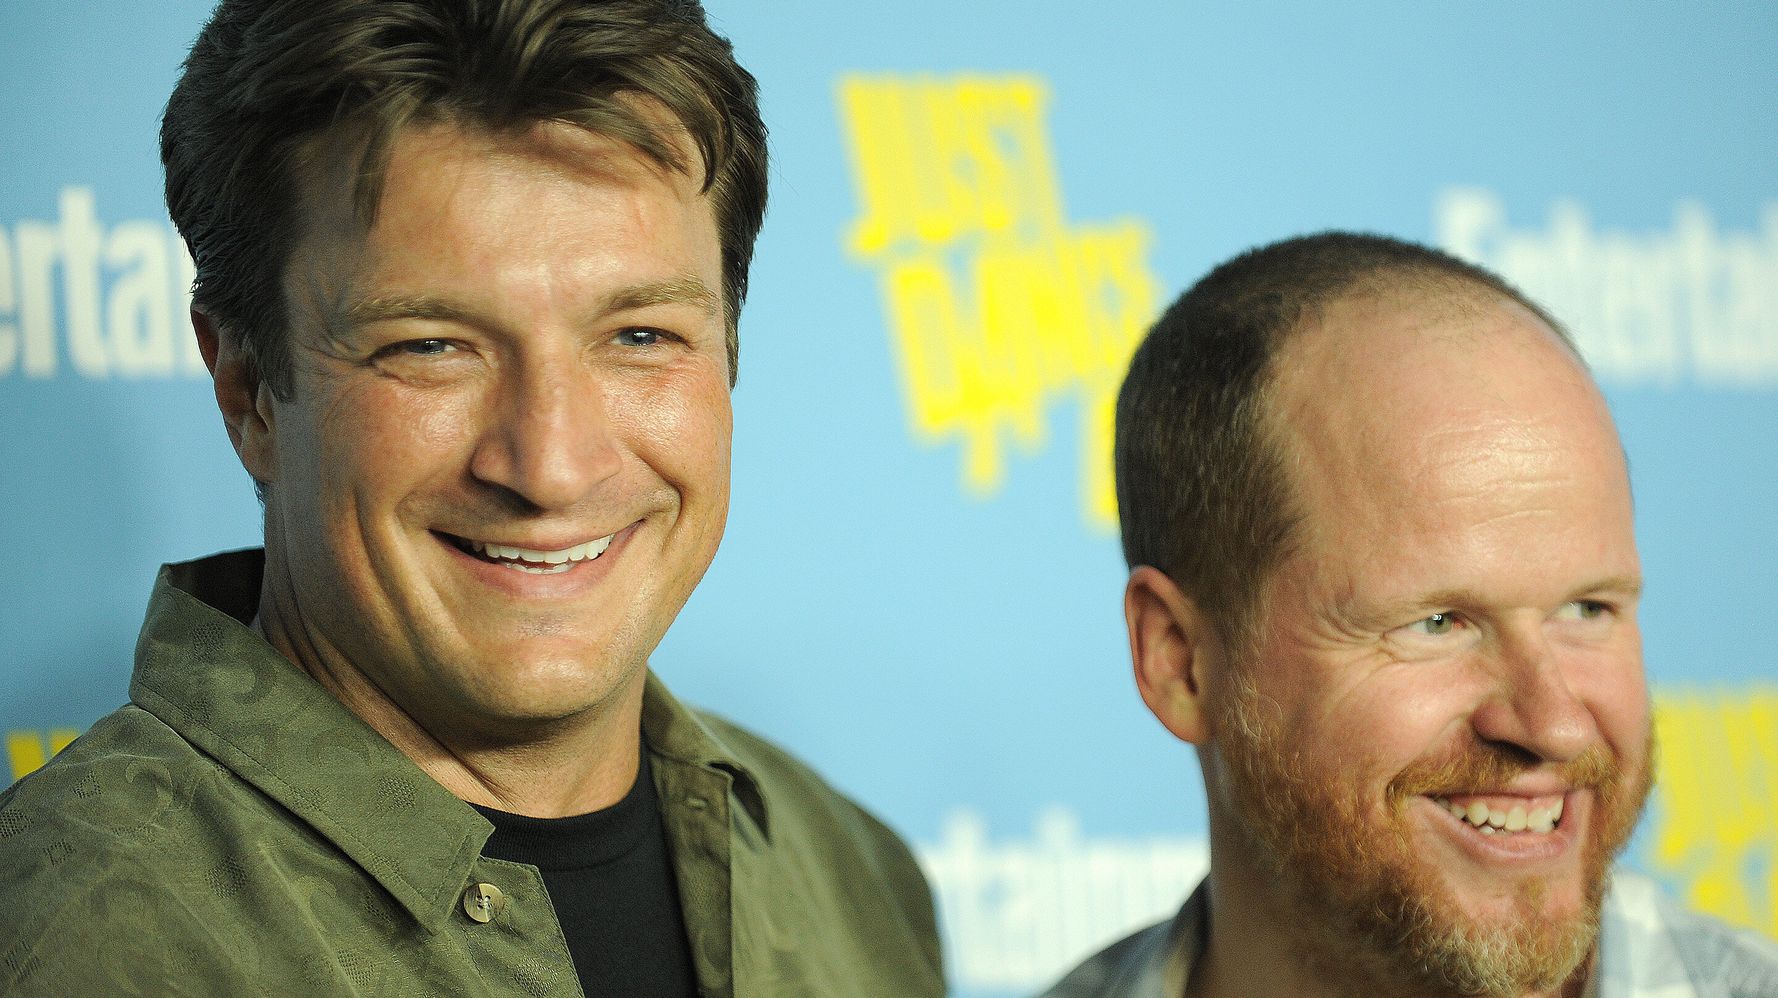 Nathan Fillion Would Work With Joss Whedon Again 'In A Second' After Misconduct Claims